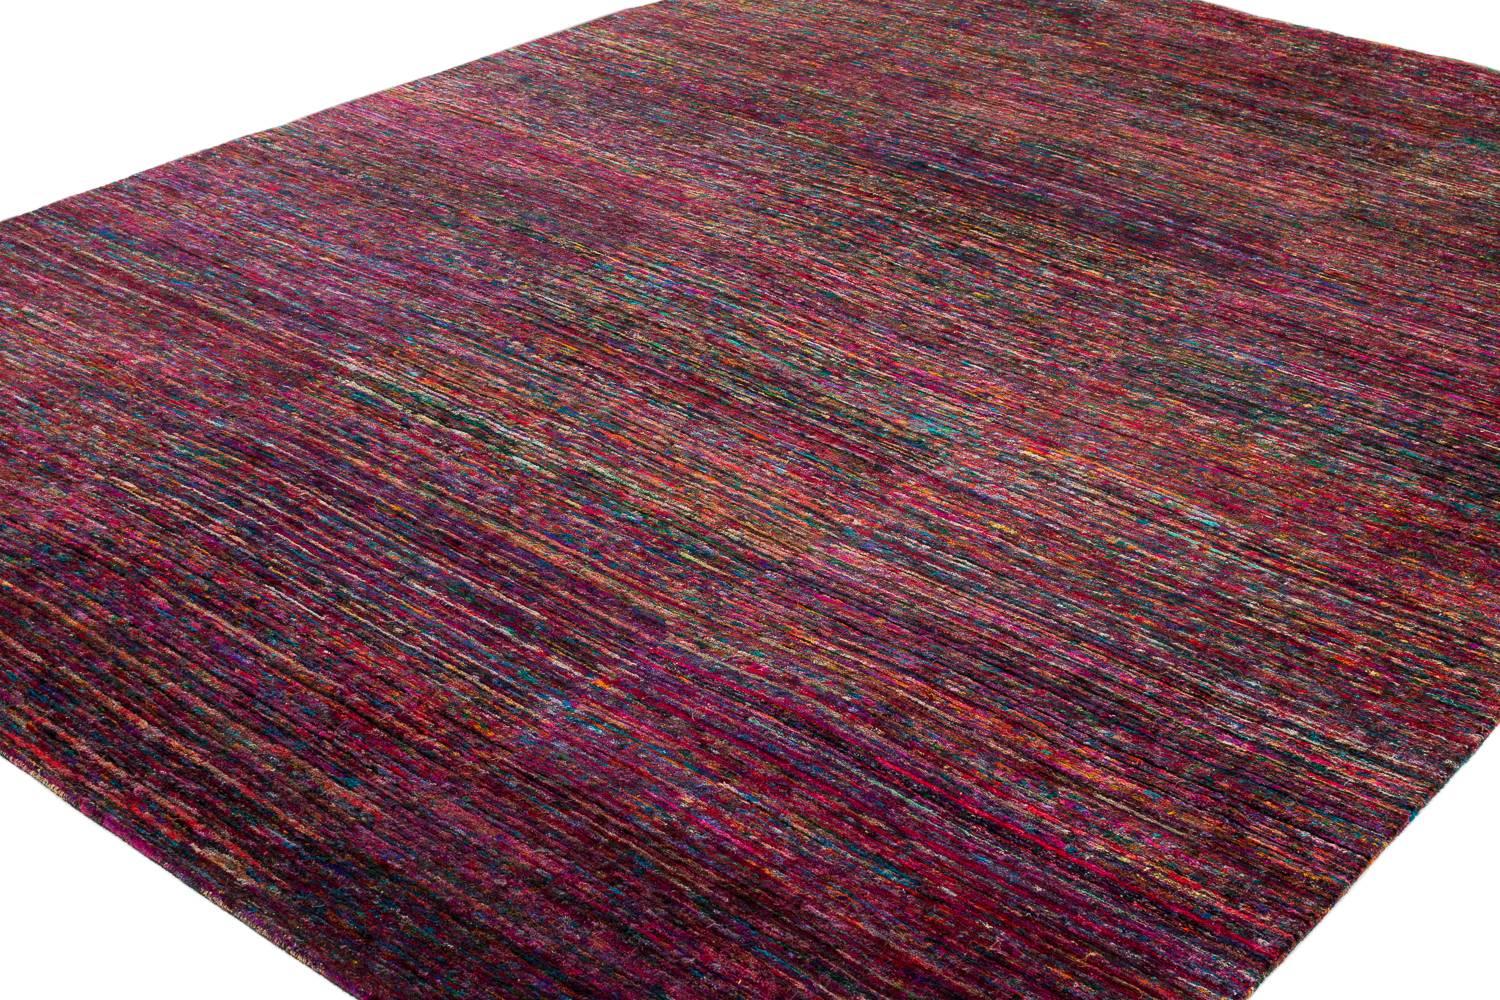 This multi-color rug was created using recycled sari's silk. It is incredibly soft and you find yourself constantly seeing new details. The variation in color is beautiful and will add to any room a pop of needed color. The dominant colors are